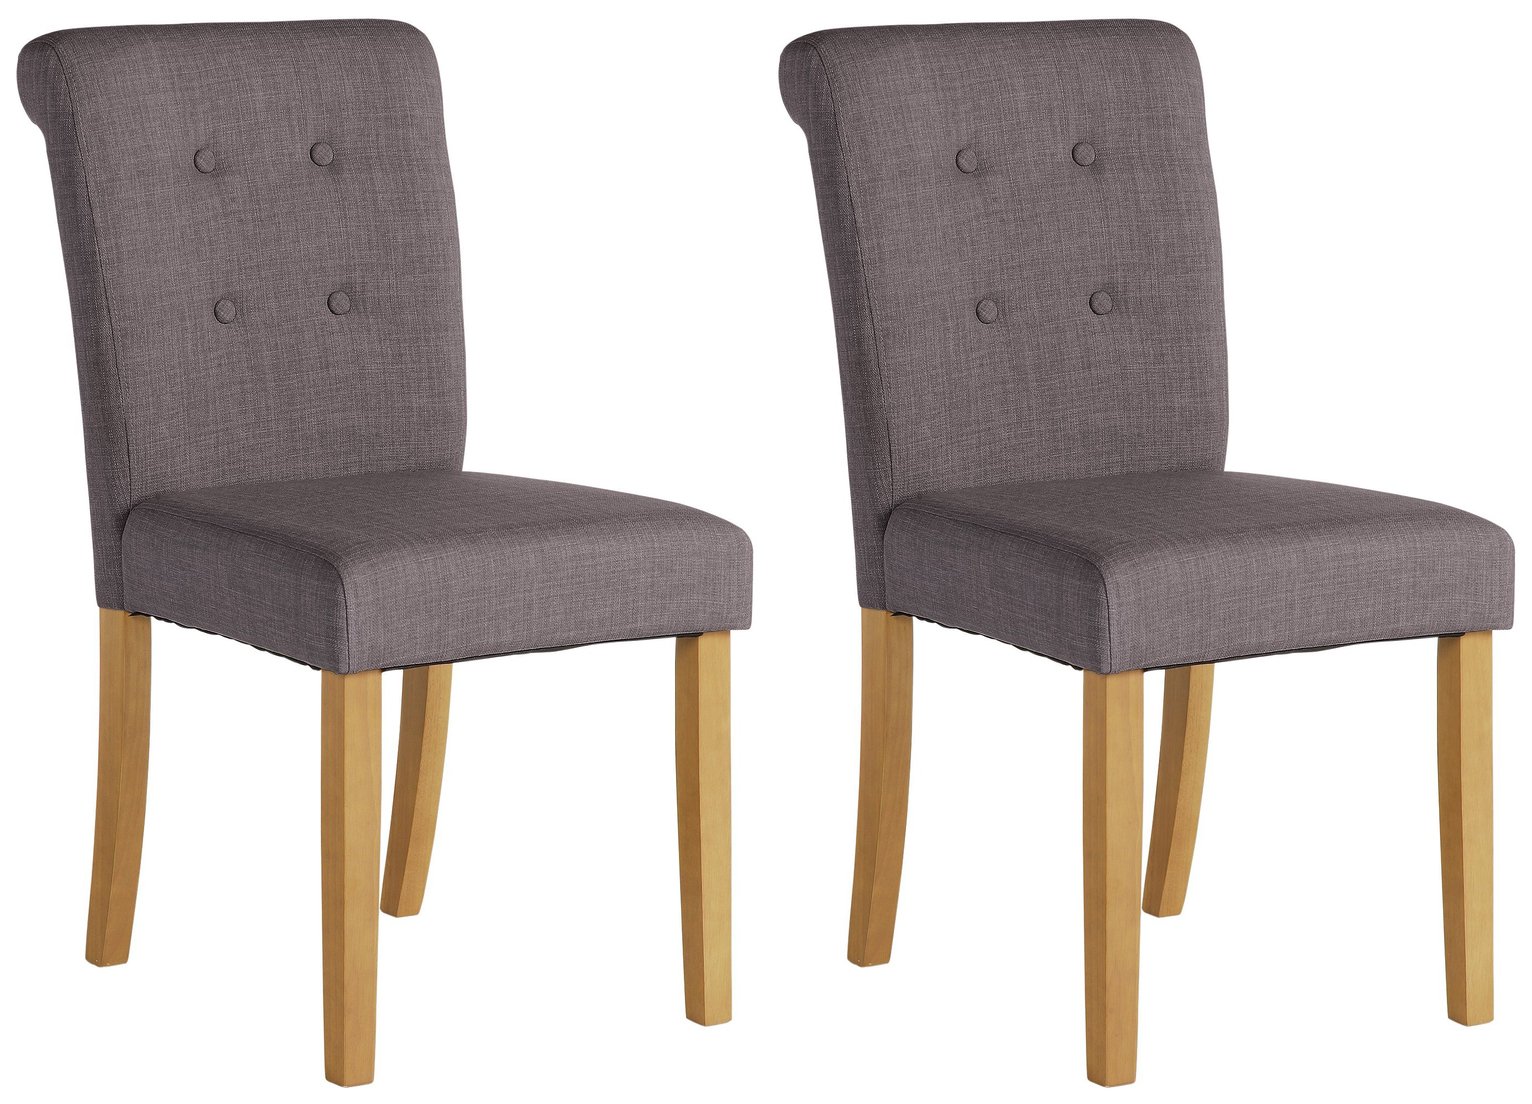 Argos Home Pair of Stroud Scroll Back Chairs Reviews